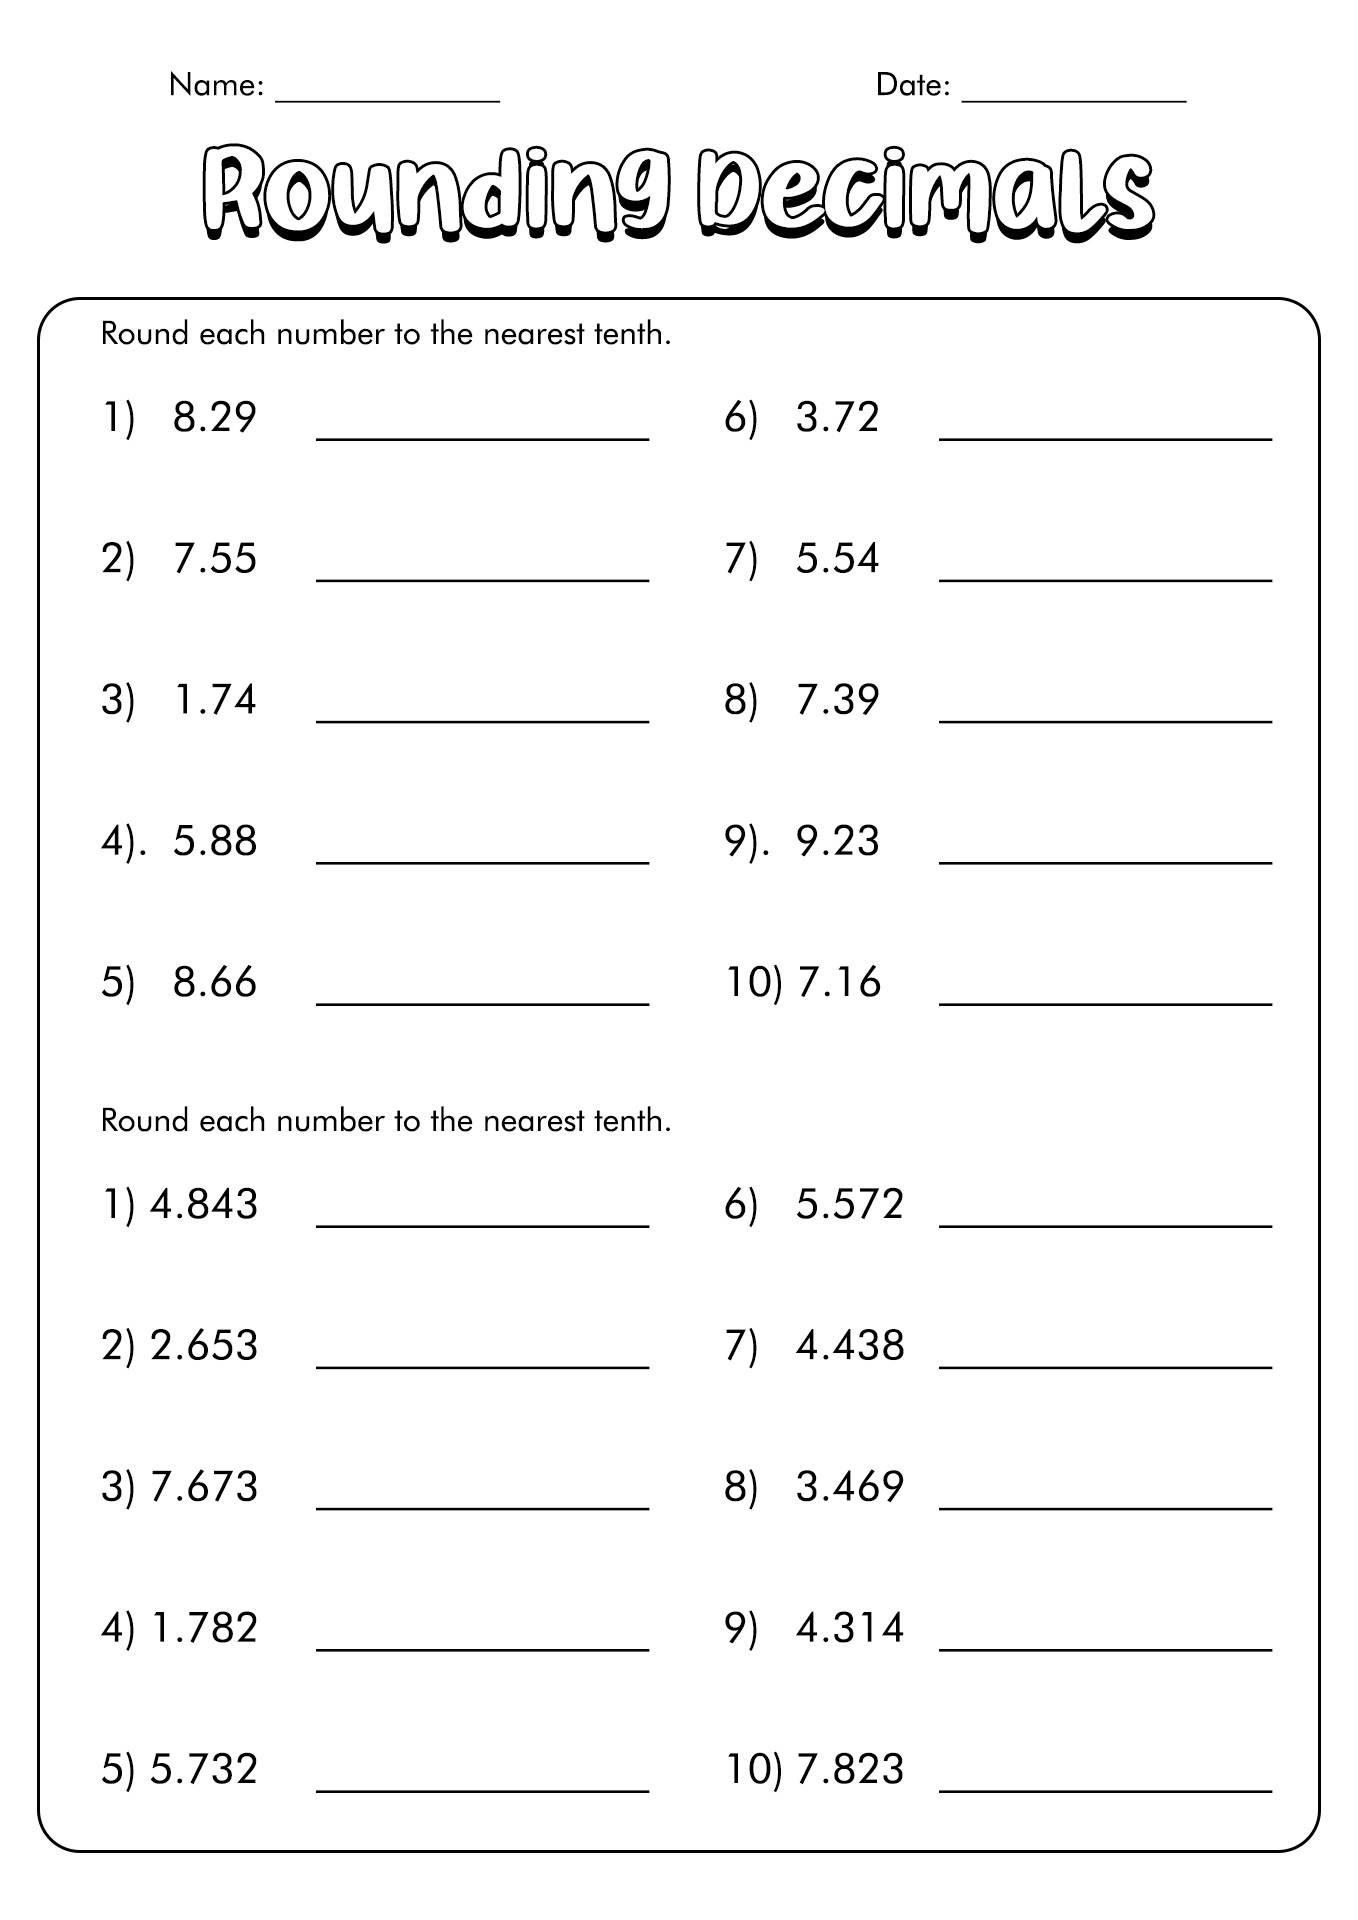 rounding-to-the-nearest-10-worksheet-for-numbers-1-10-with-arrows-and-stars